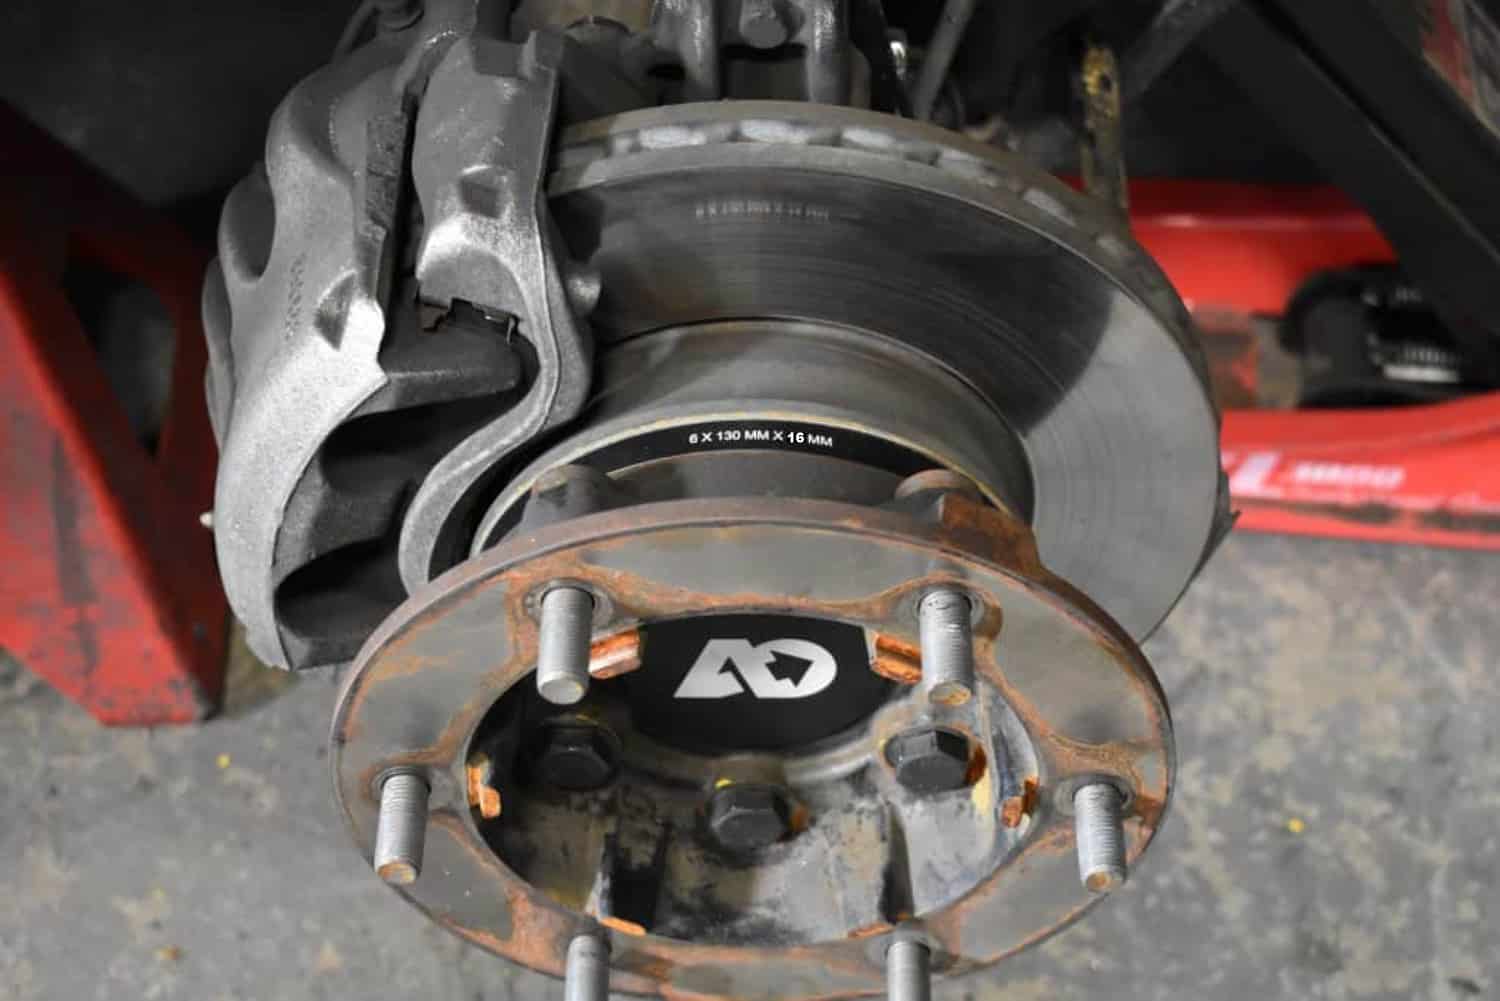 AO Wheel Spacers for Sprinter 3500 (Pair) - Agile Off Road